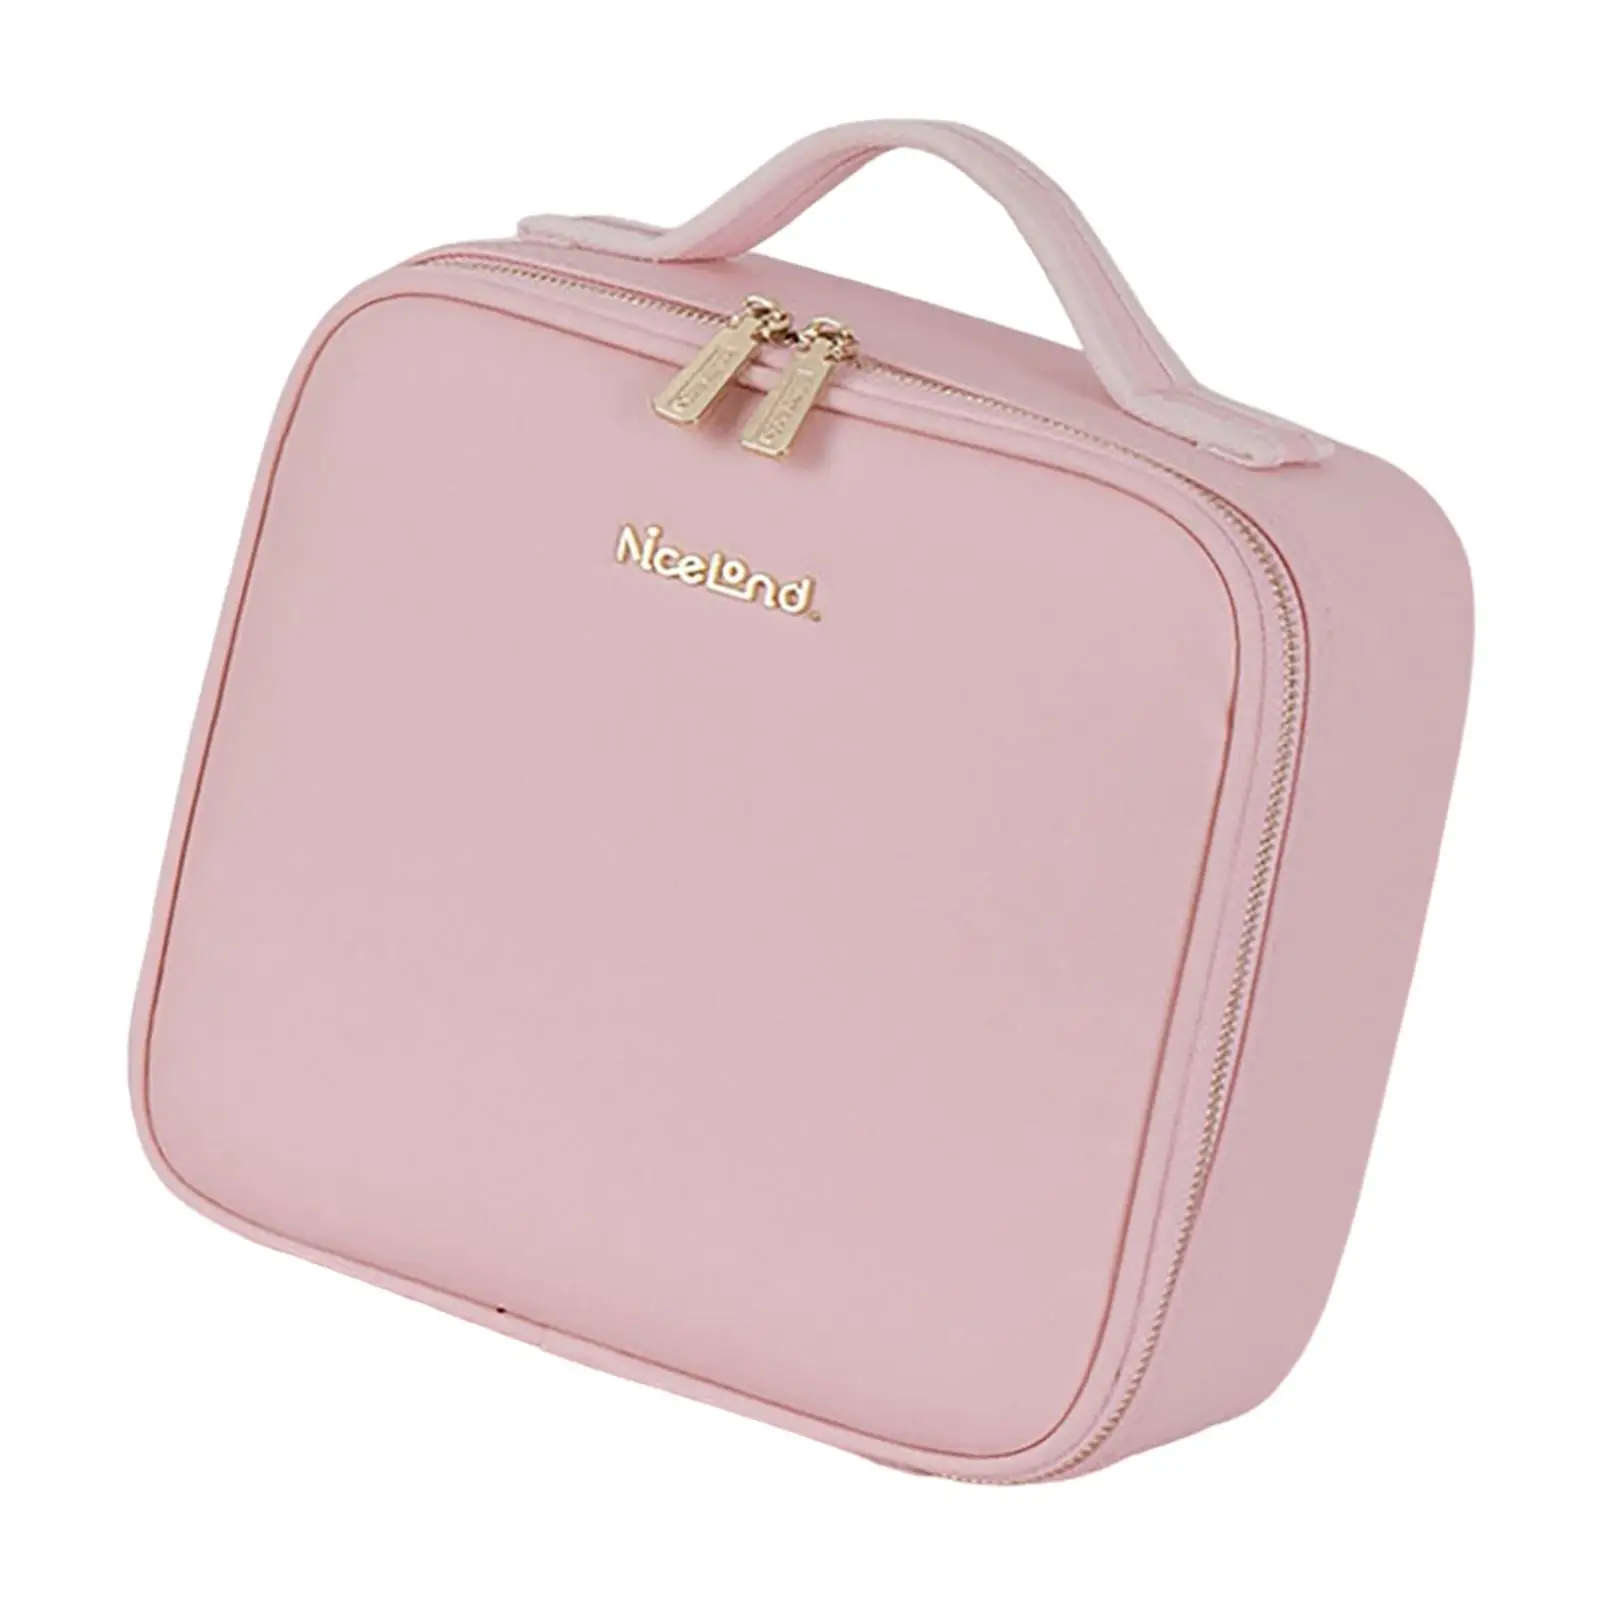 Train Makeup Case with Portable Multifunction for Makeup Brushes